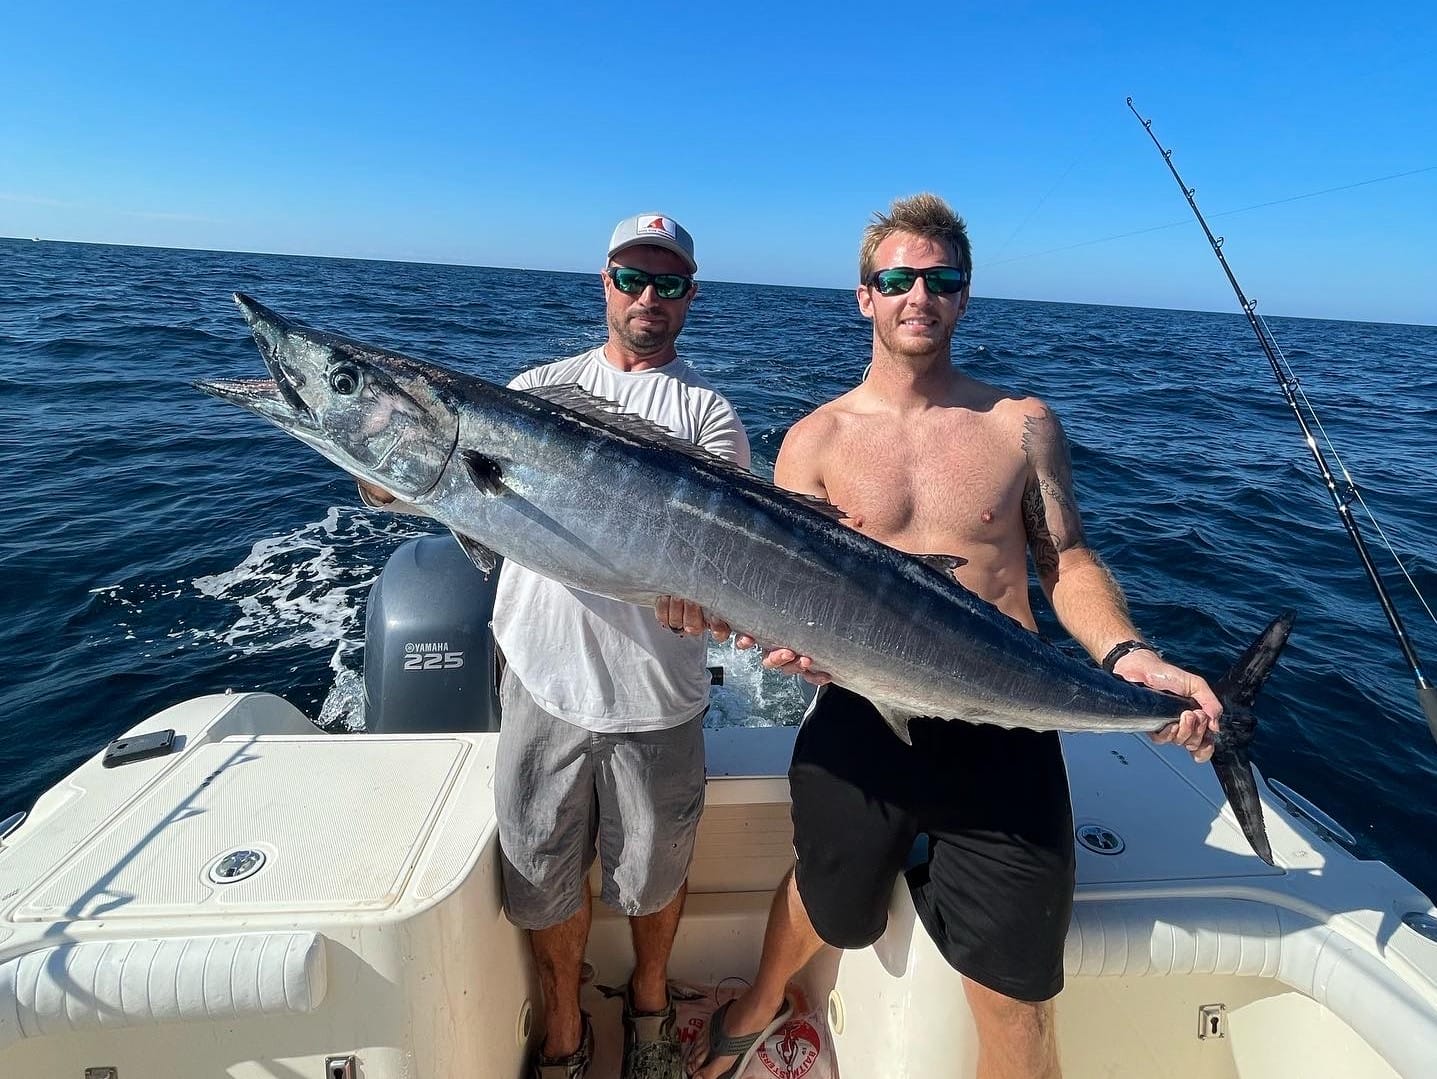 Saltwater fishing gear for wahoo and trolling